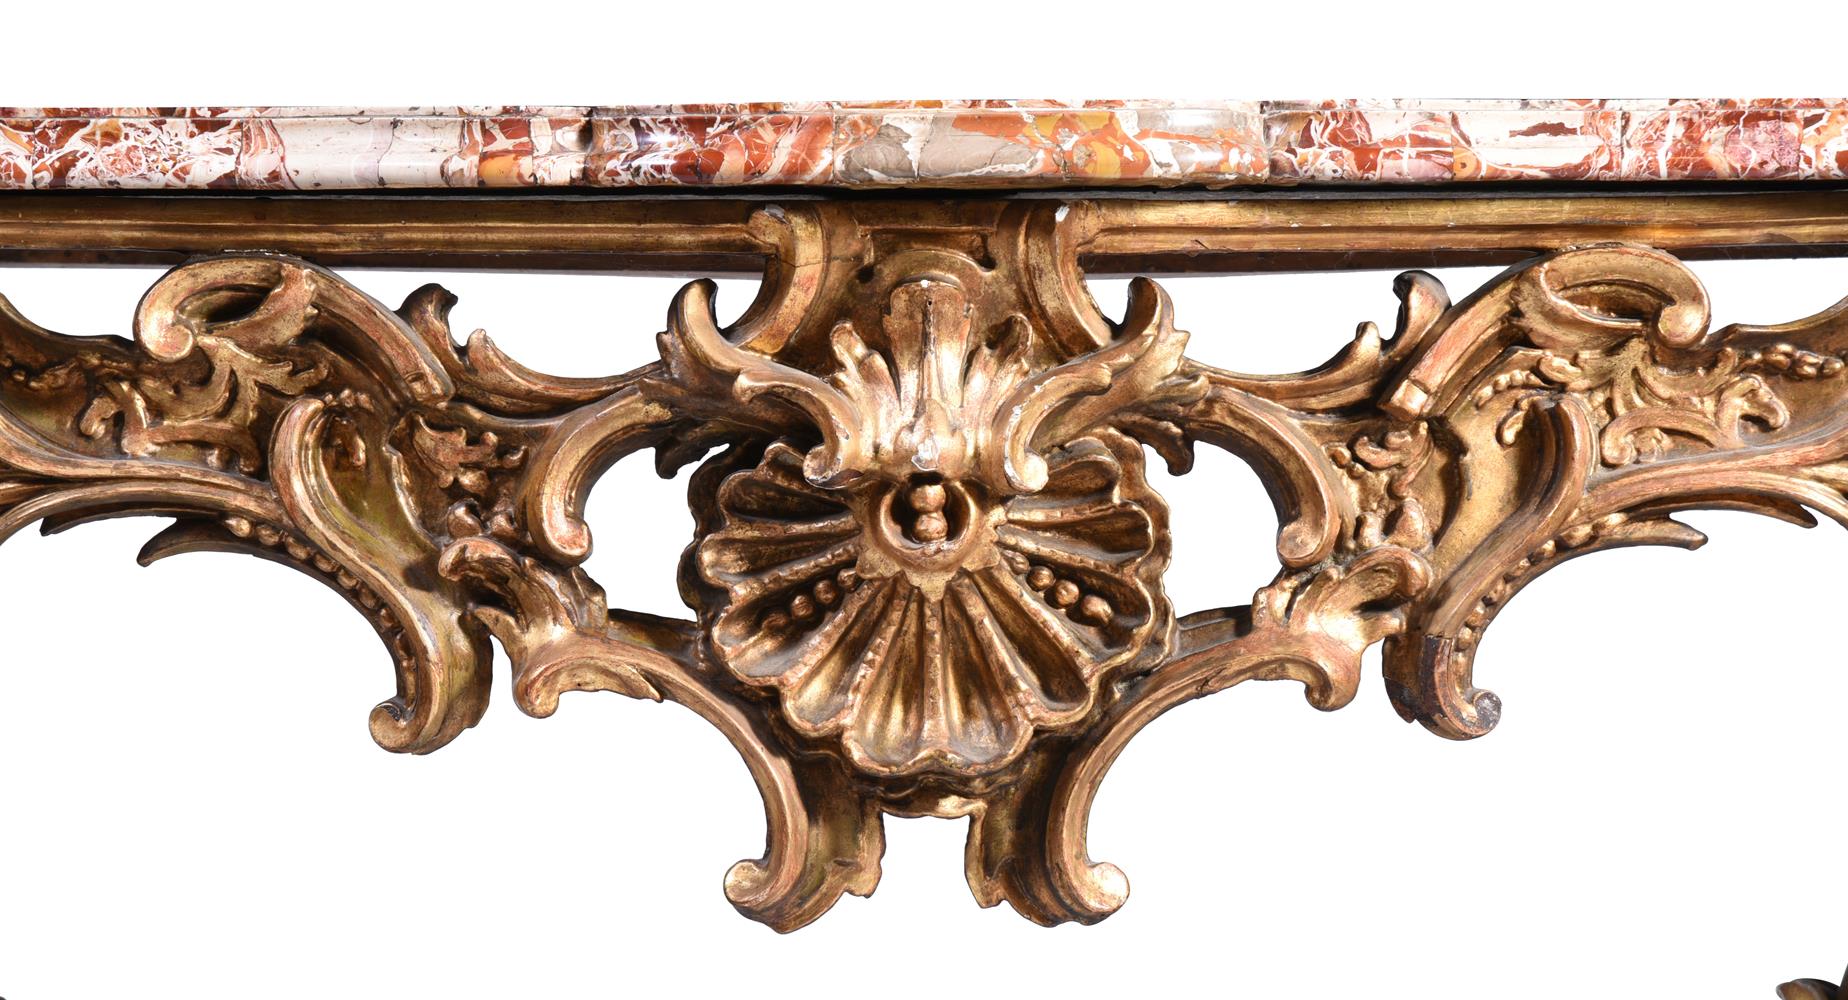 AN ITALIAN CARVED GILTWOOD SERPENTINE CONSOLE TABLE, 18TH CENTURY - Image 5 of 6